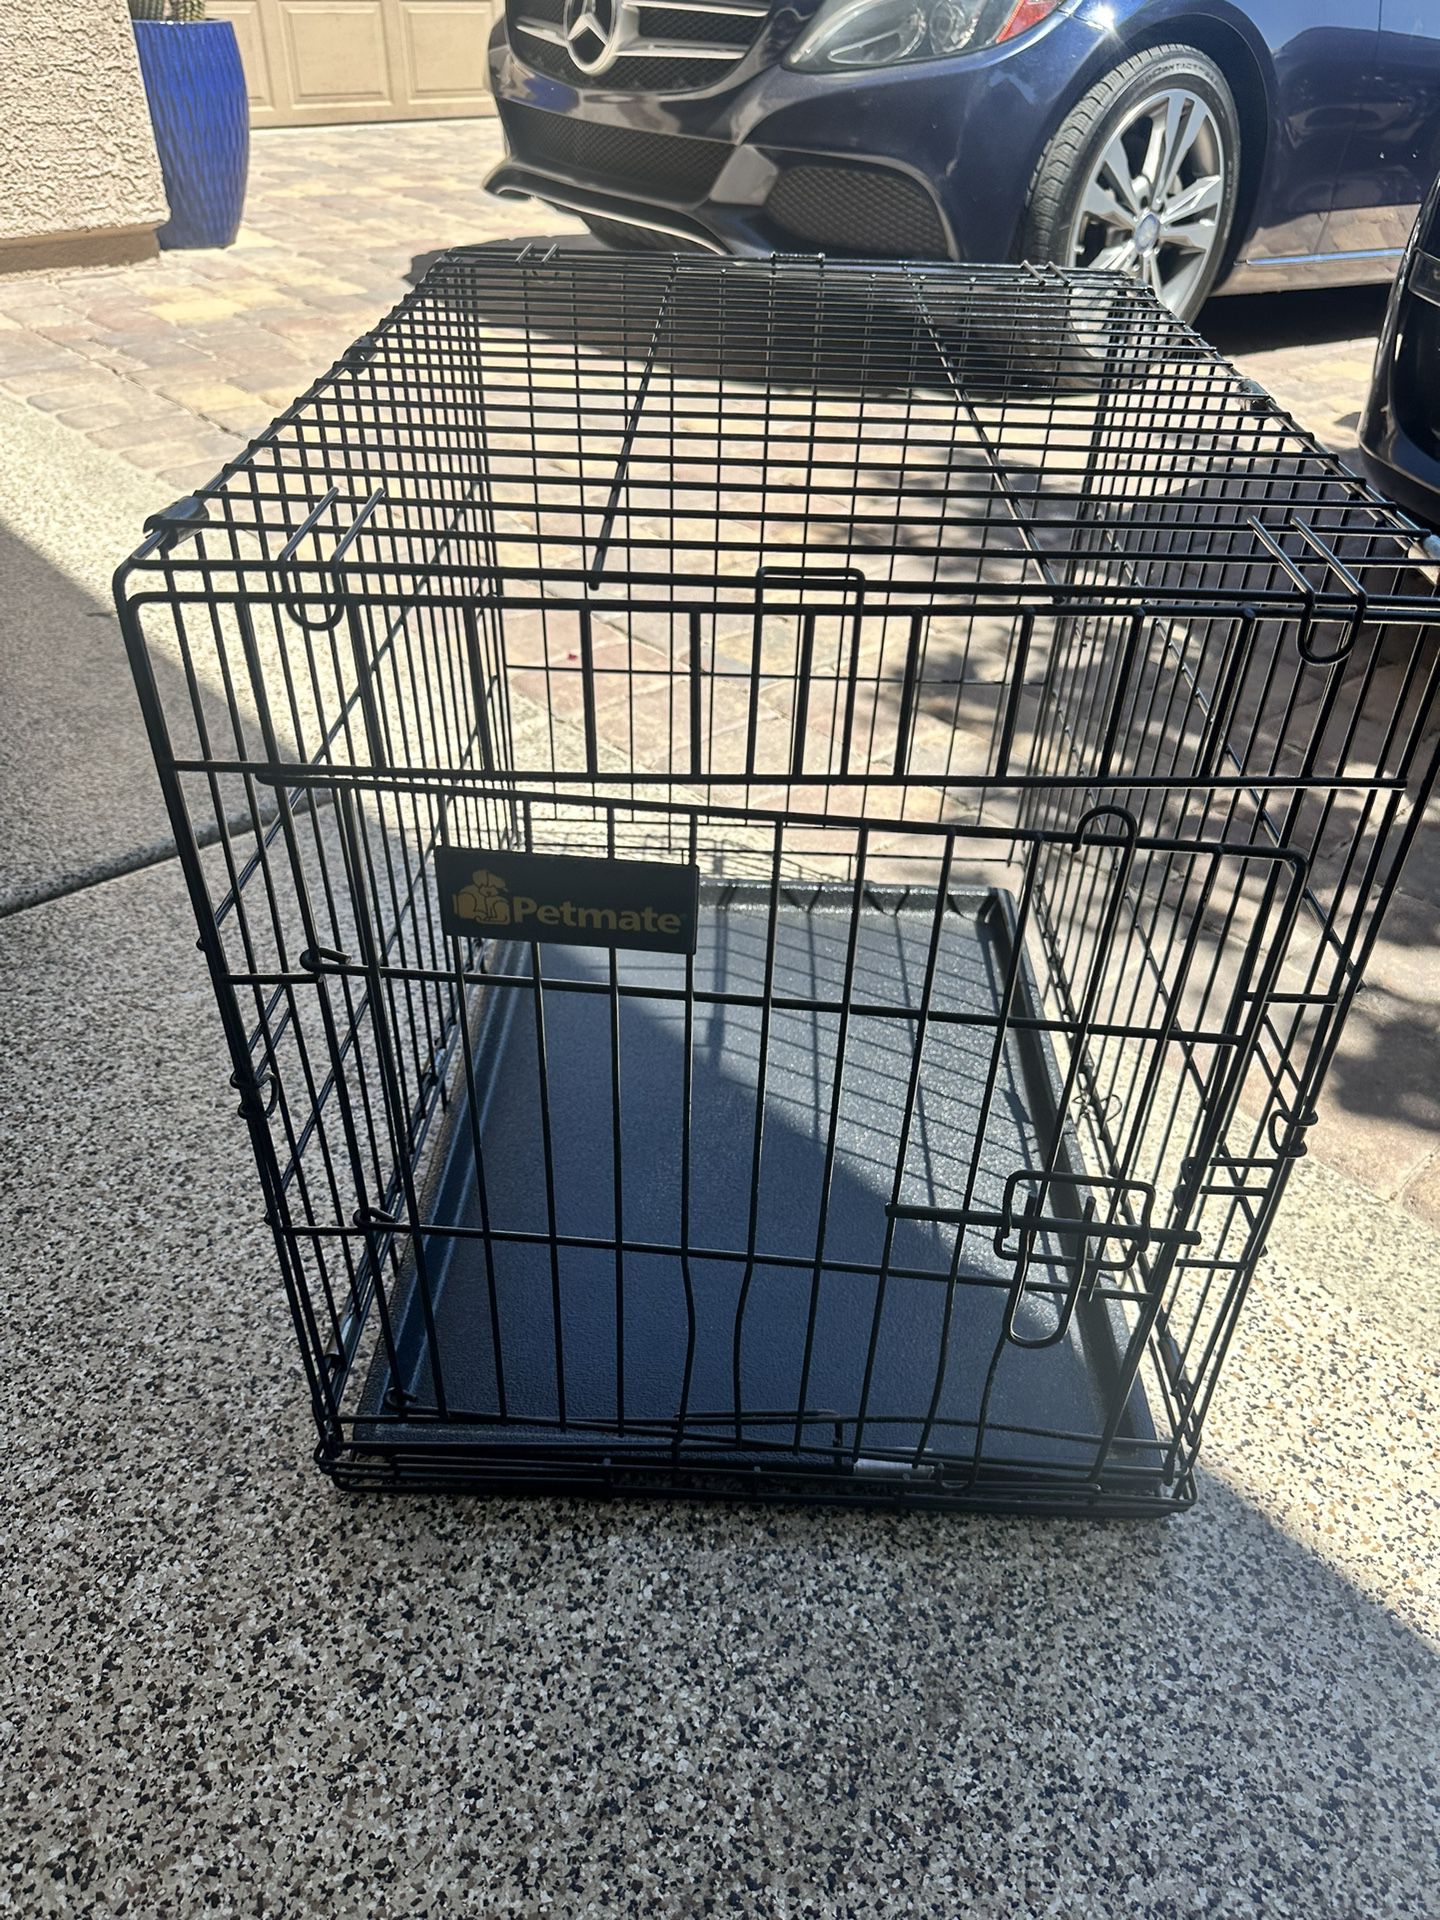 Pet Mate Dog Kennel (small)